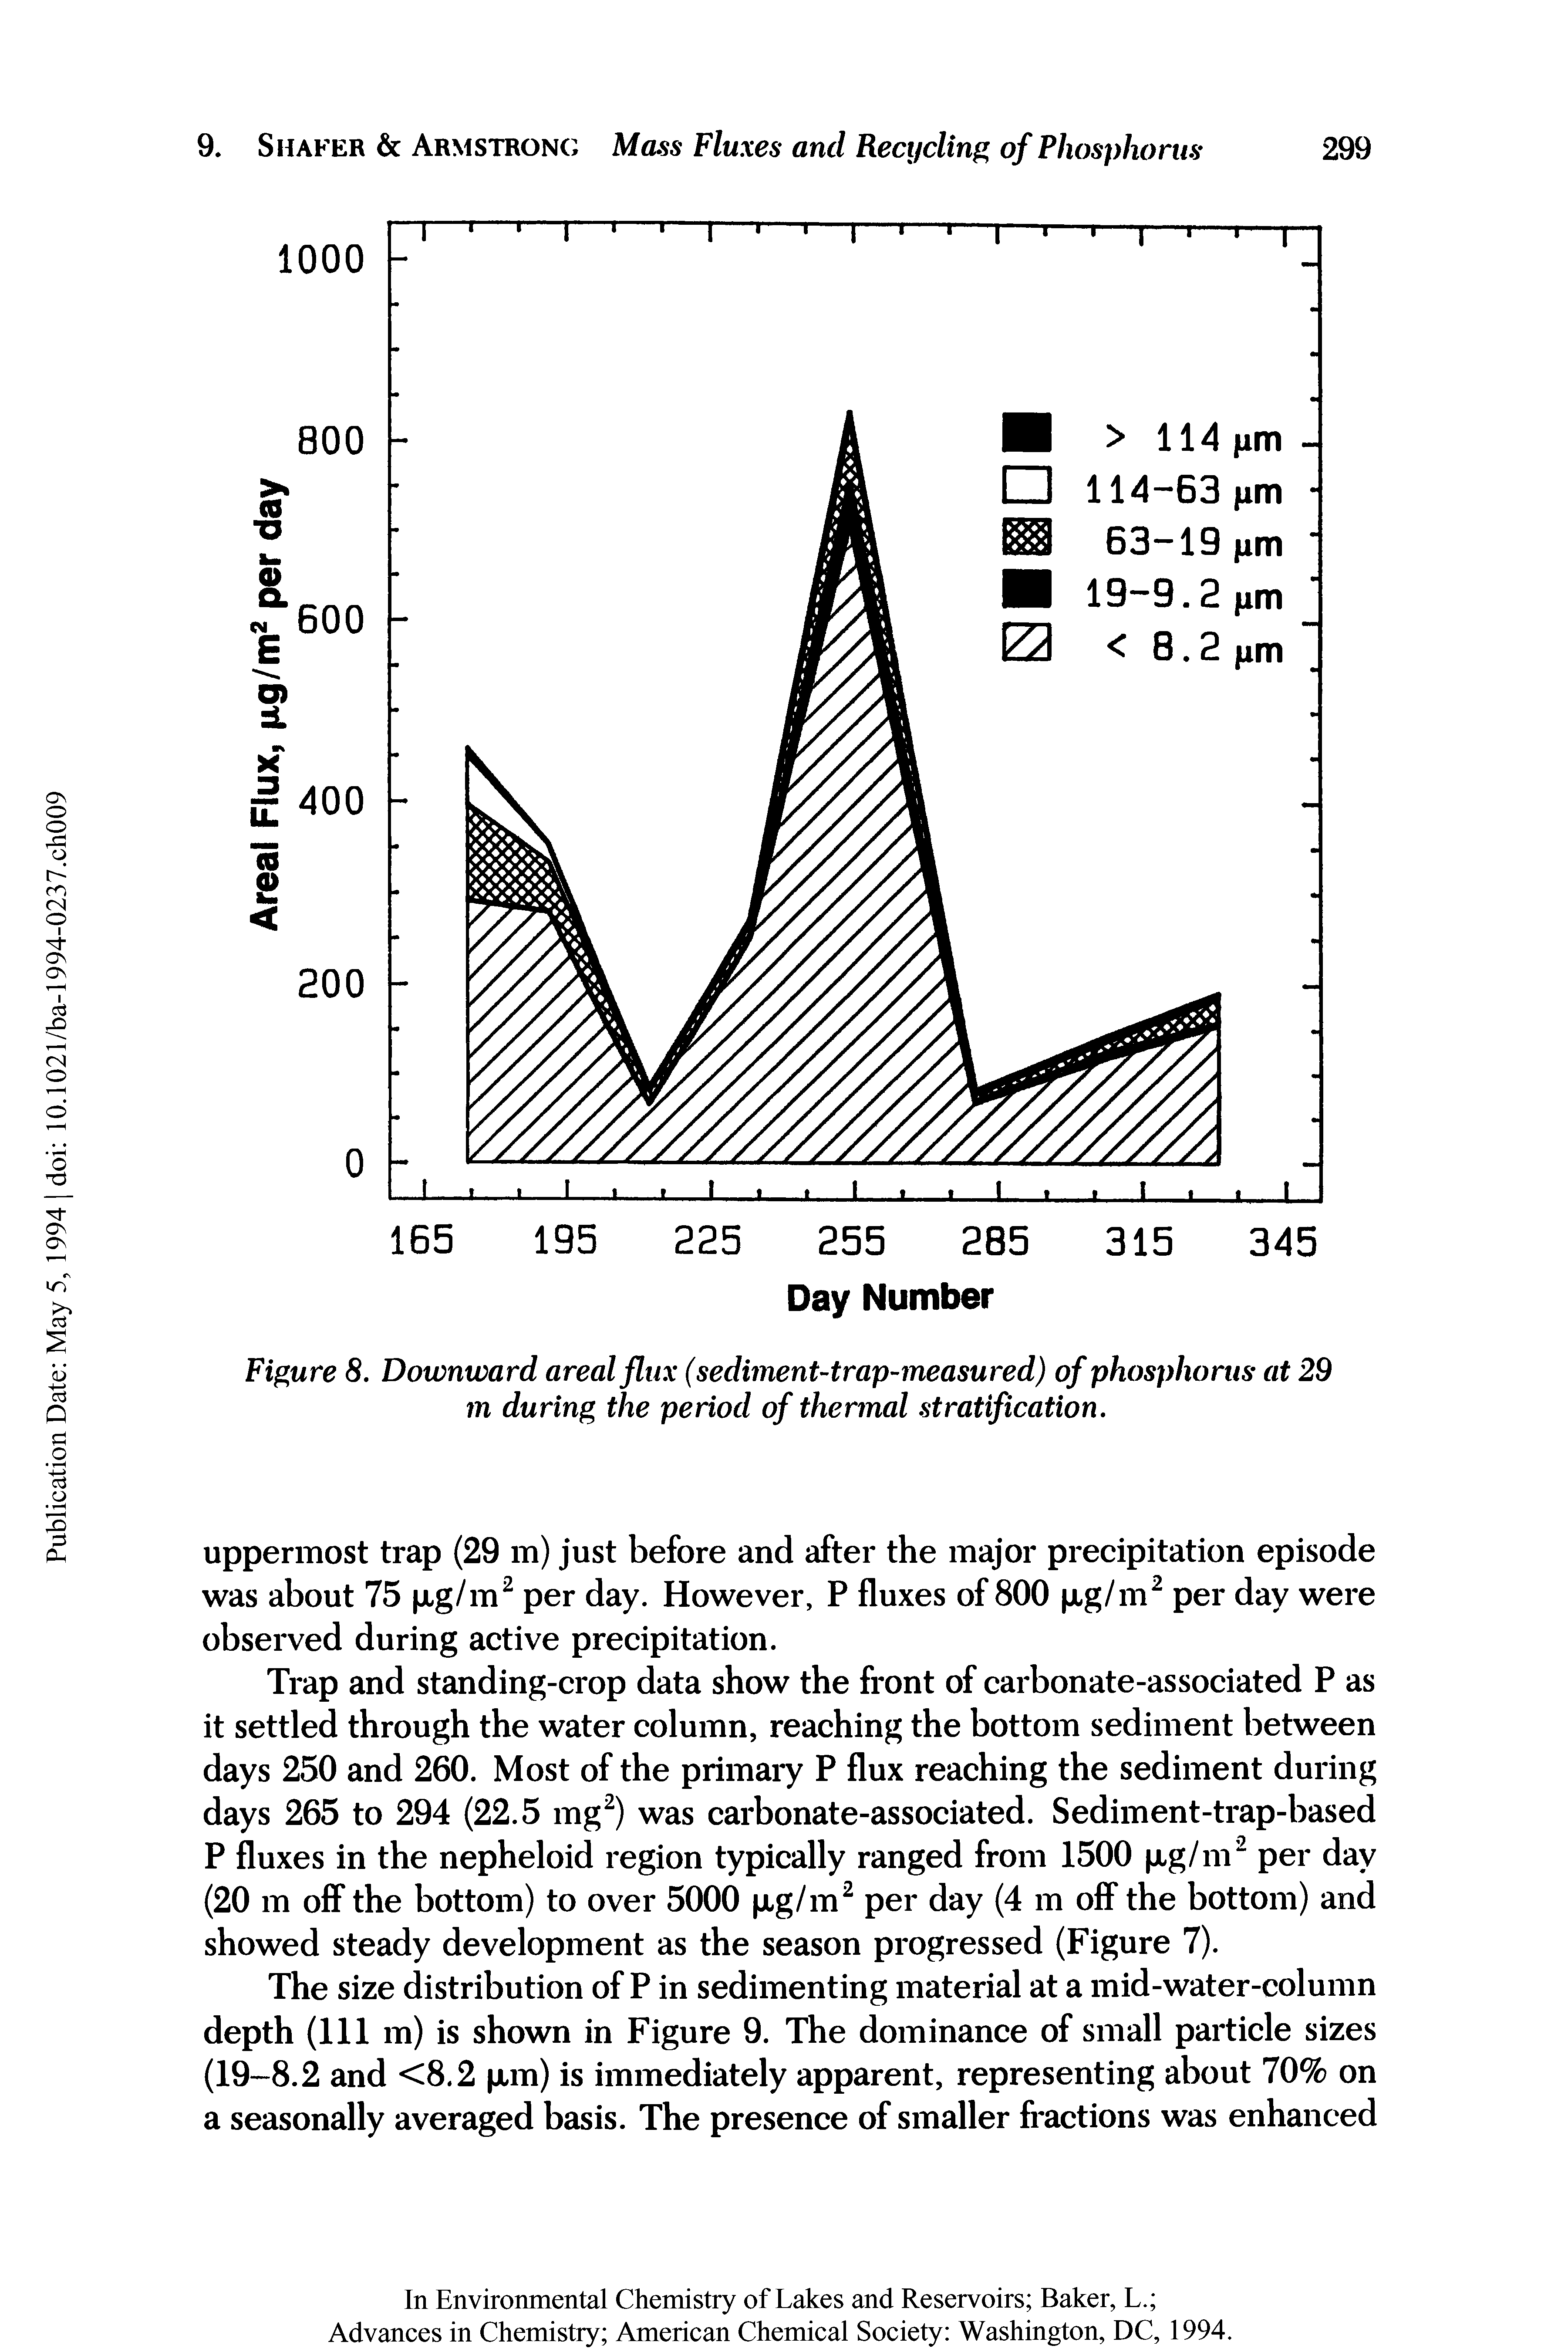 Figure 8. Downward areal flux (sediment-trap-measured) of phosphorus at 29 m during the period of thermal stratification.